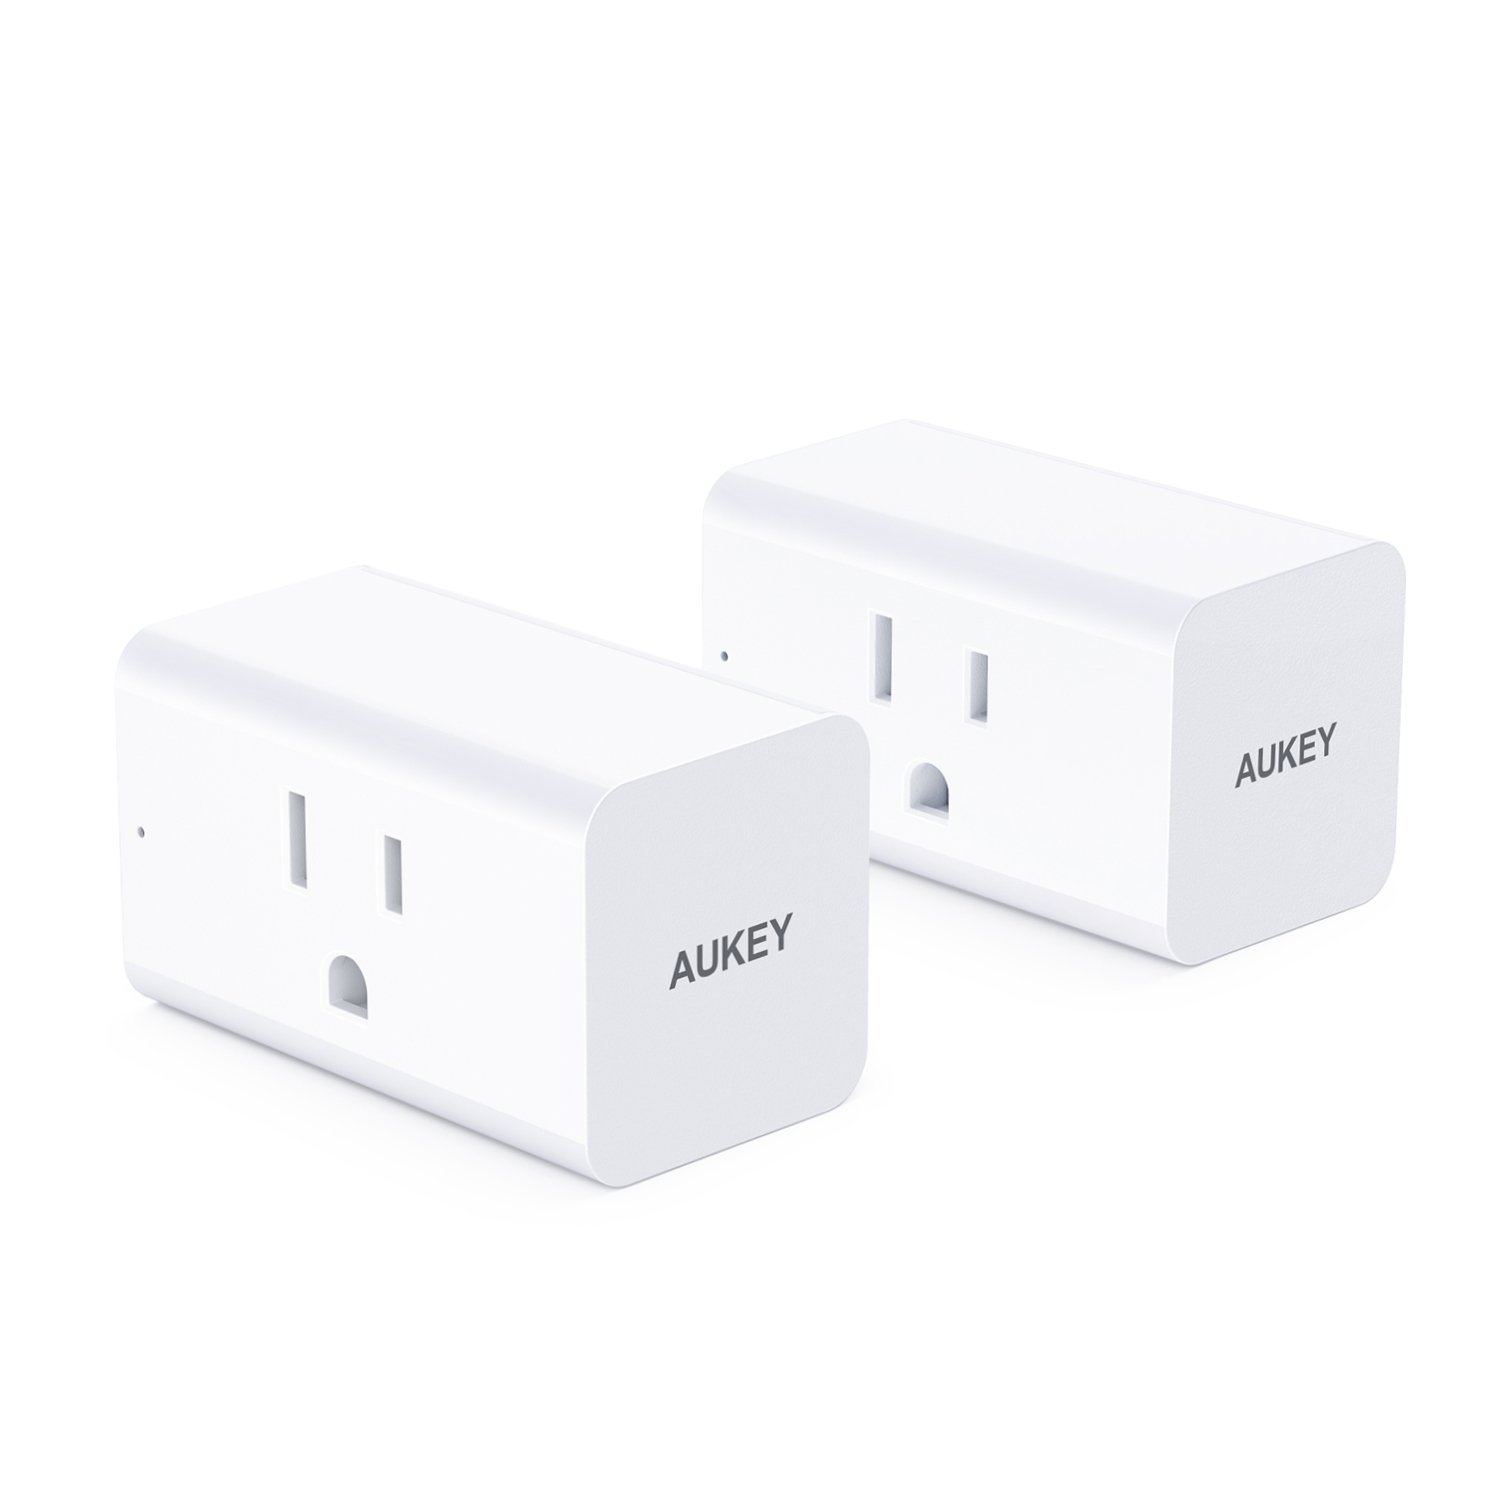 Aukey 2-pack Wi-Fi smart plug for $22